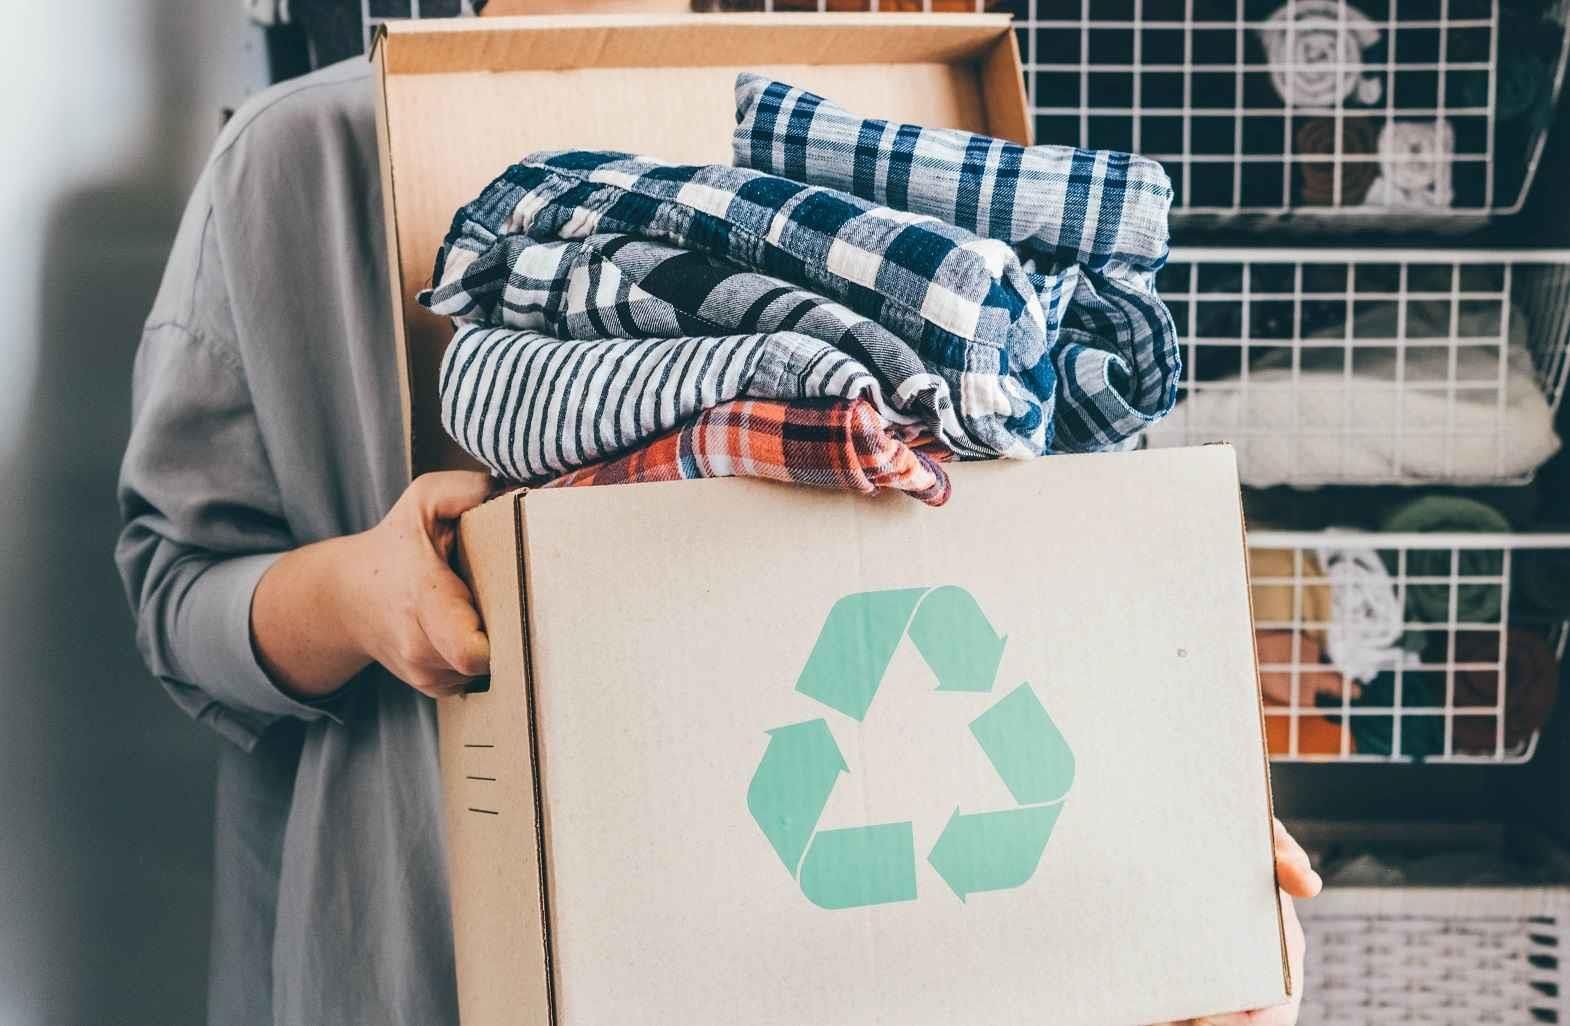 Caring The Environment By Recycling Of Non-Degradable Textile Material